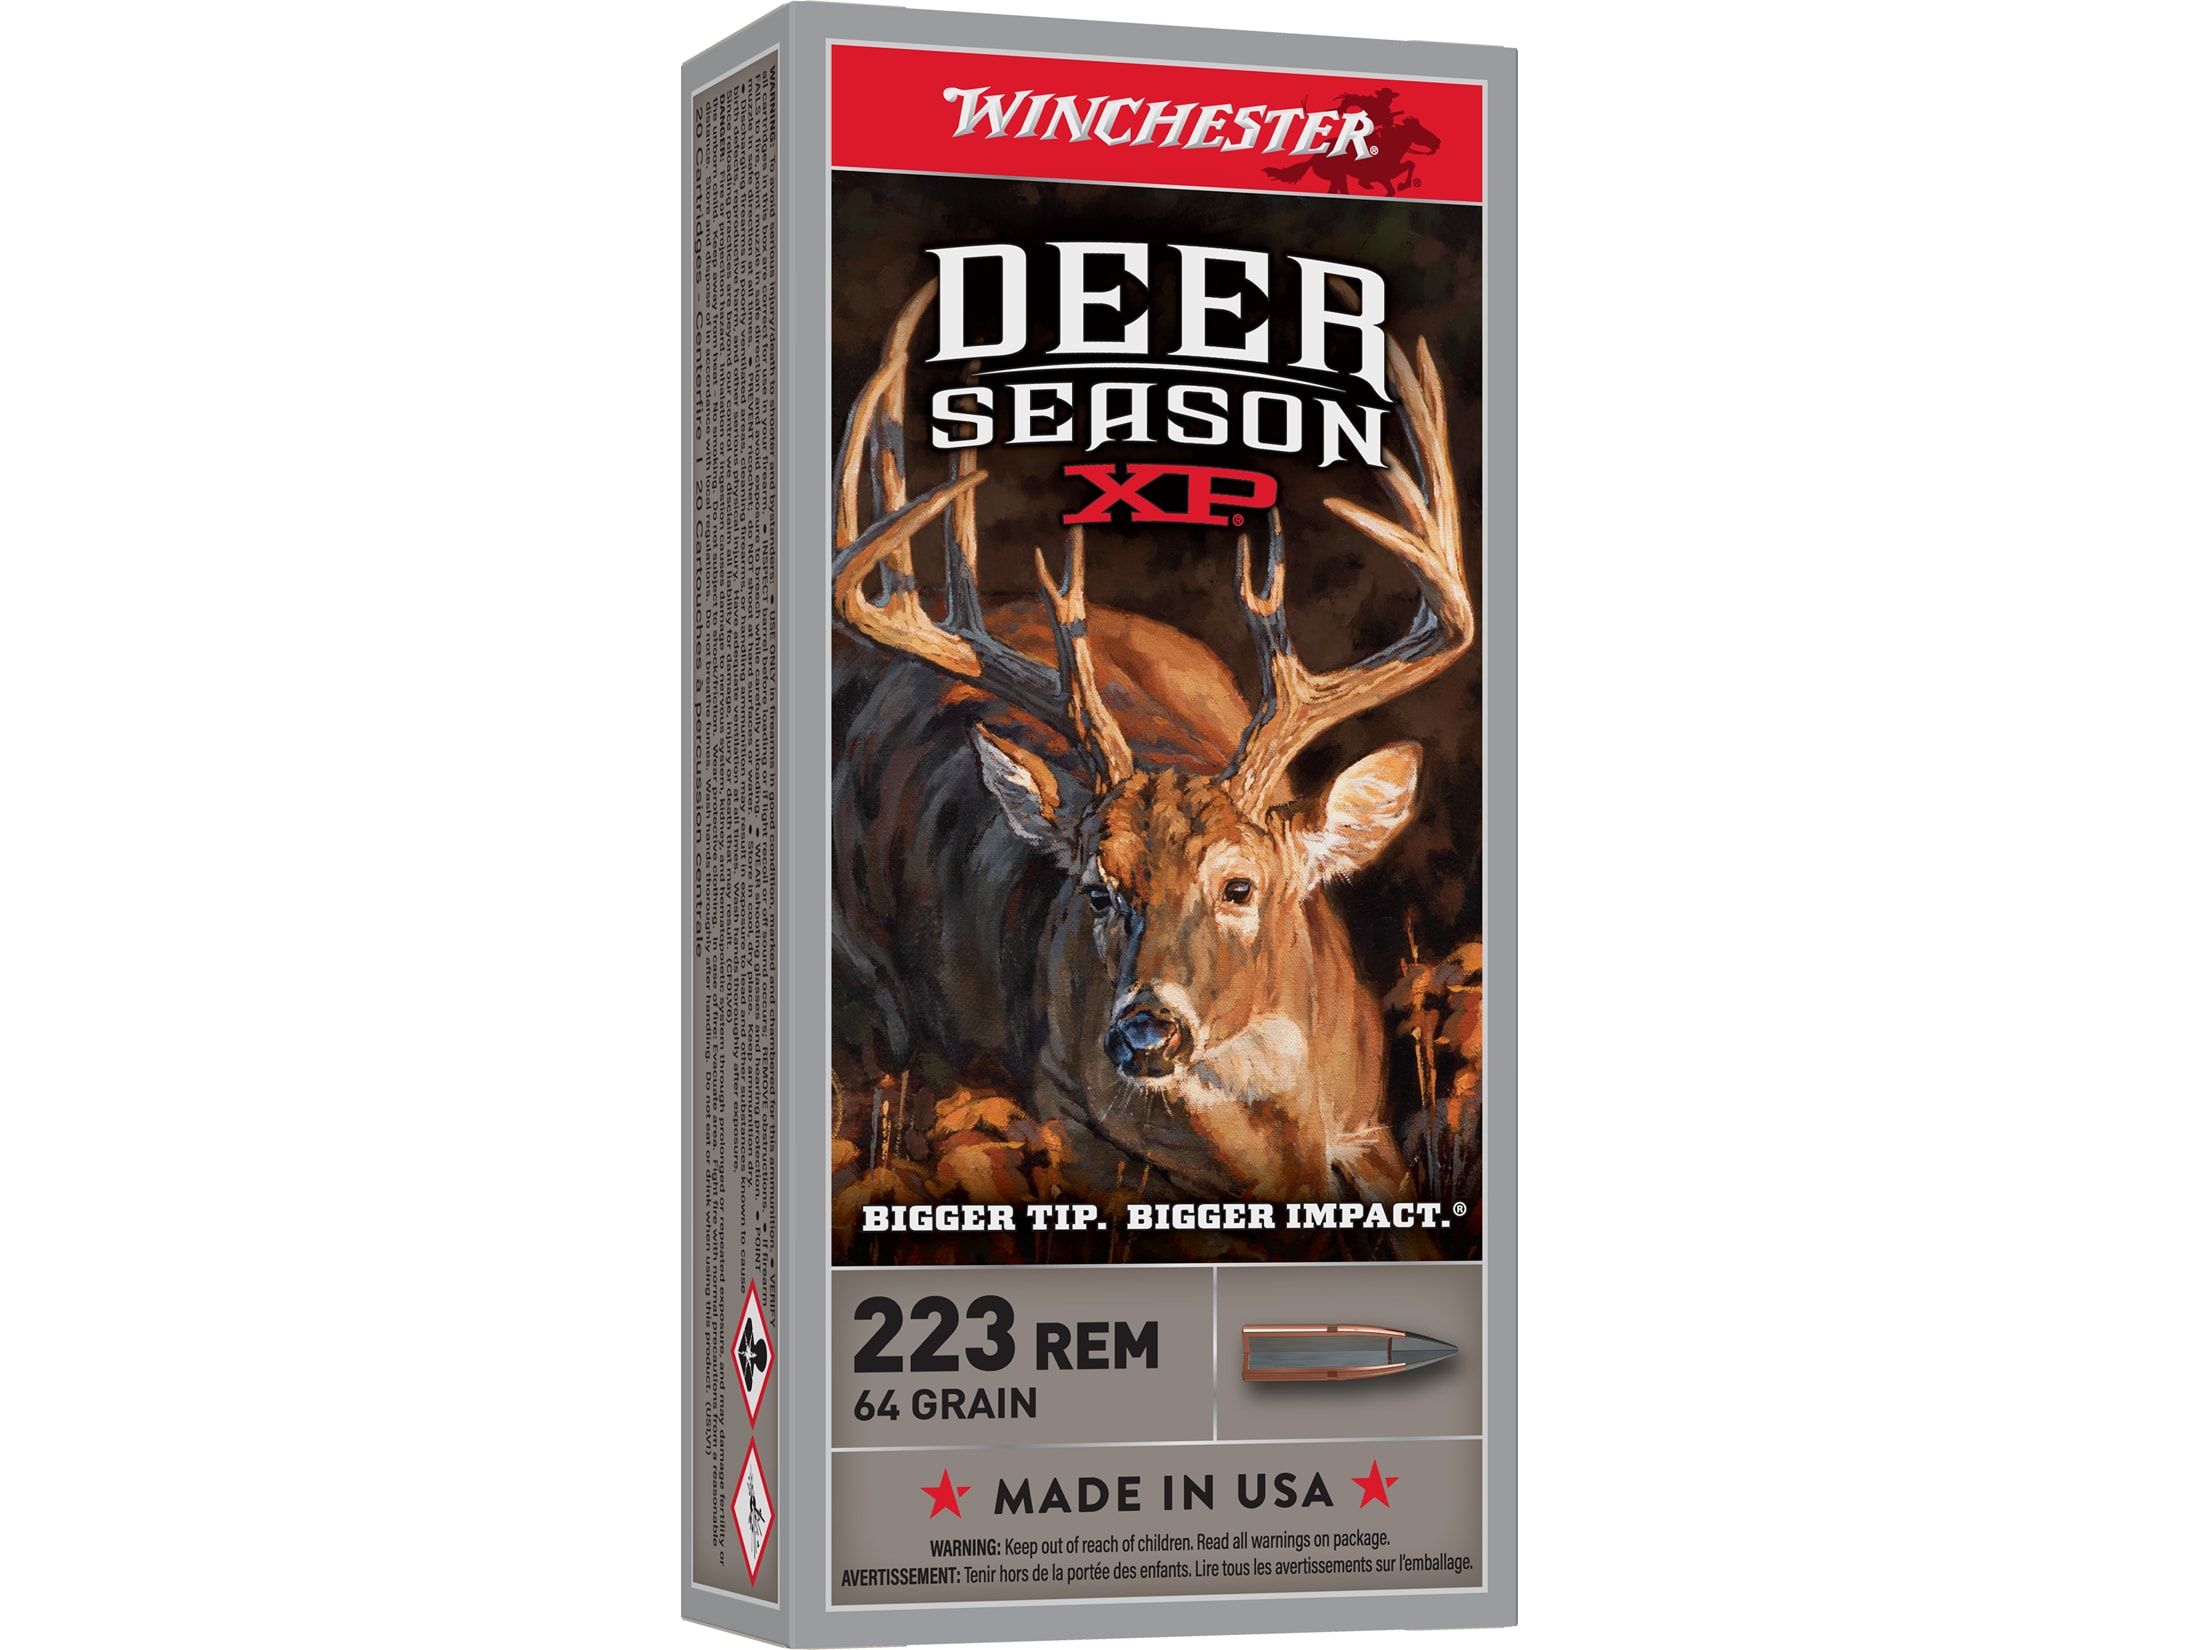 Where To Shoot A Deer With A 223: Precision Tips